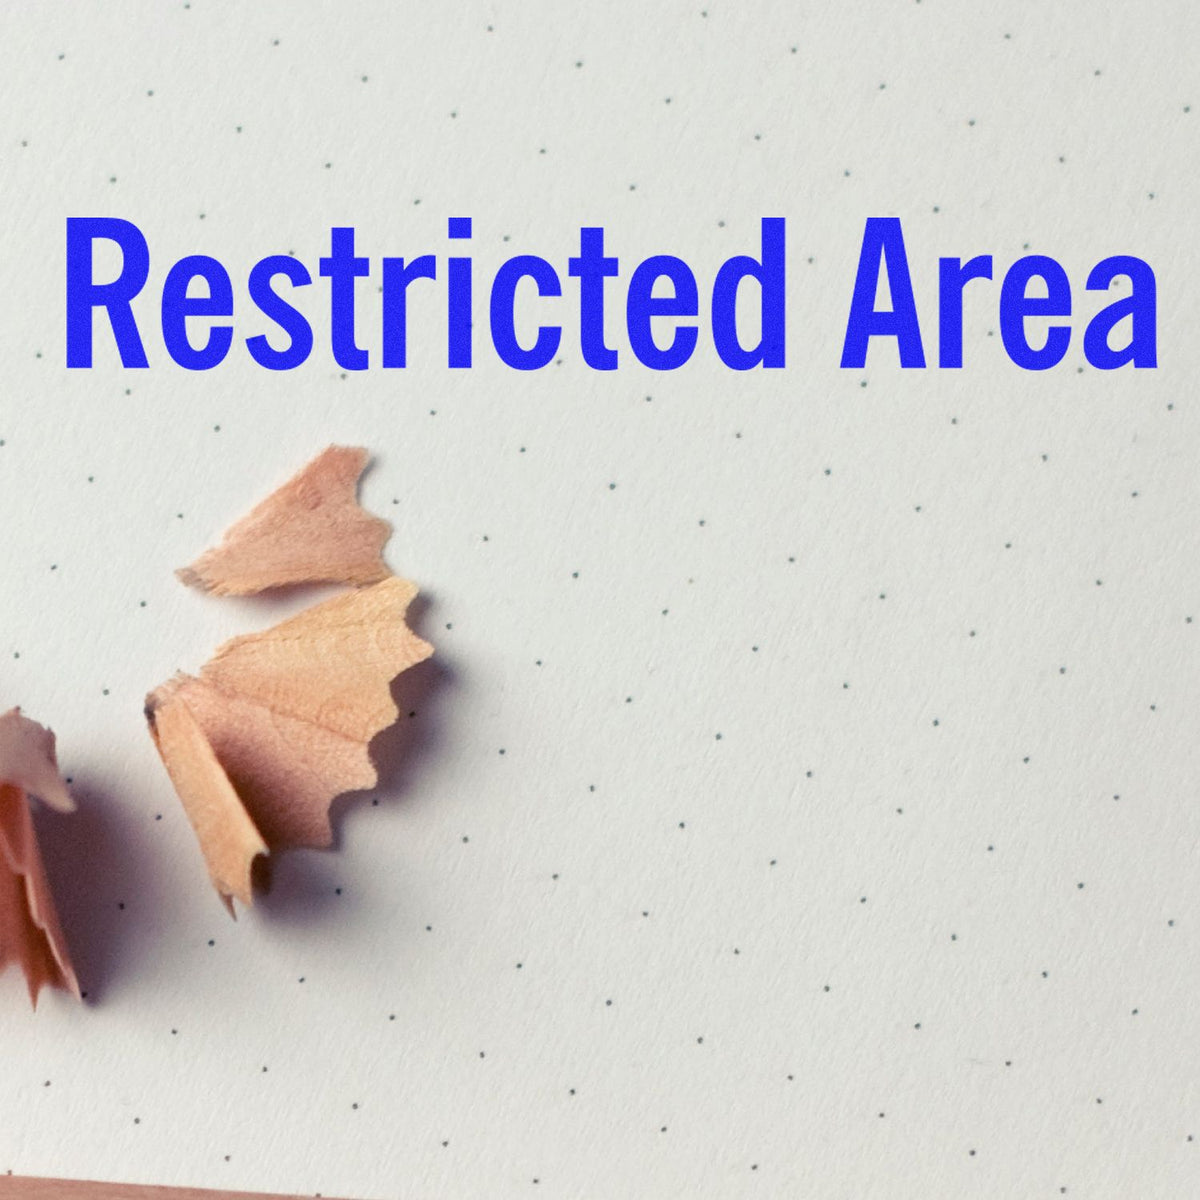 Large Restricted Area Rubber Stamp In Use Photo